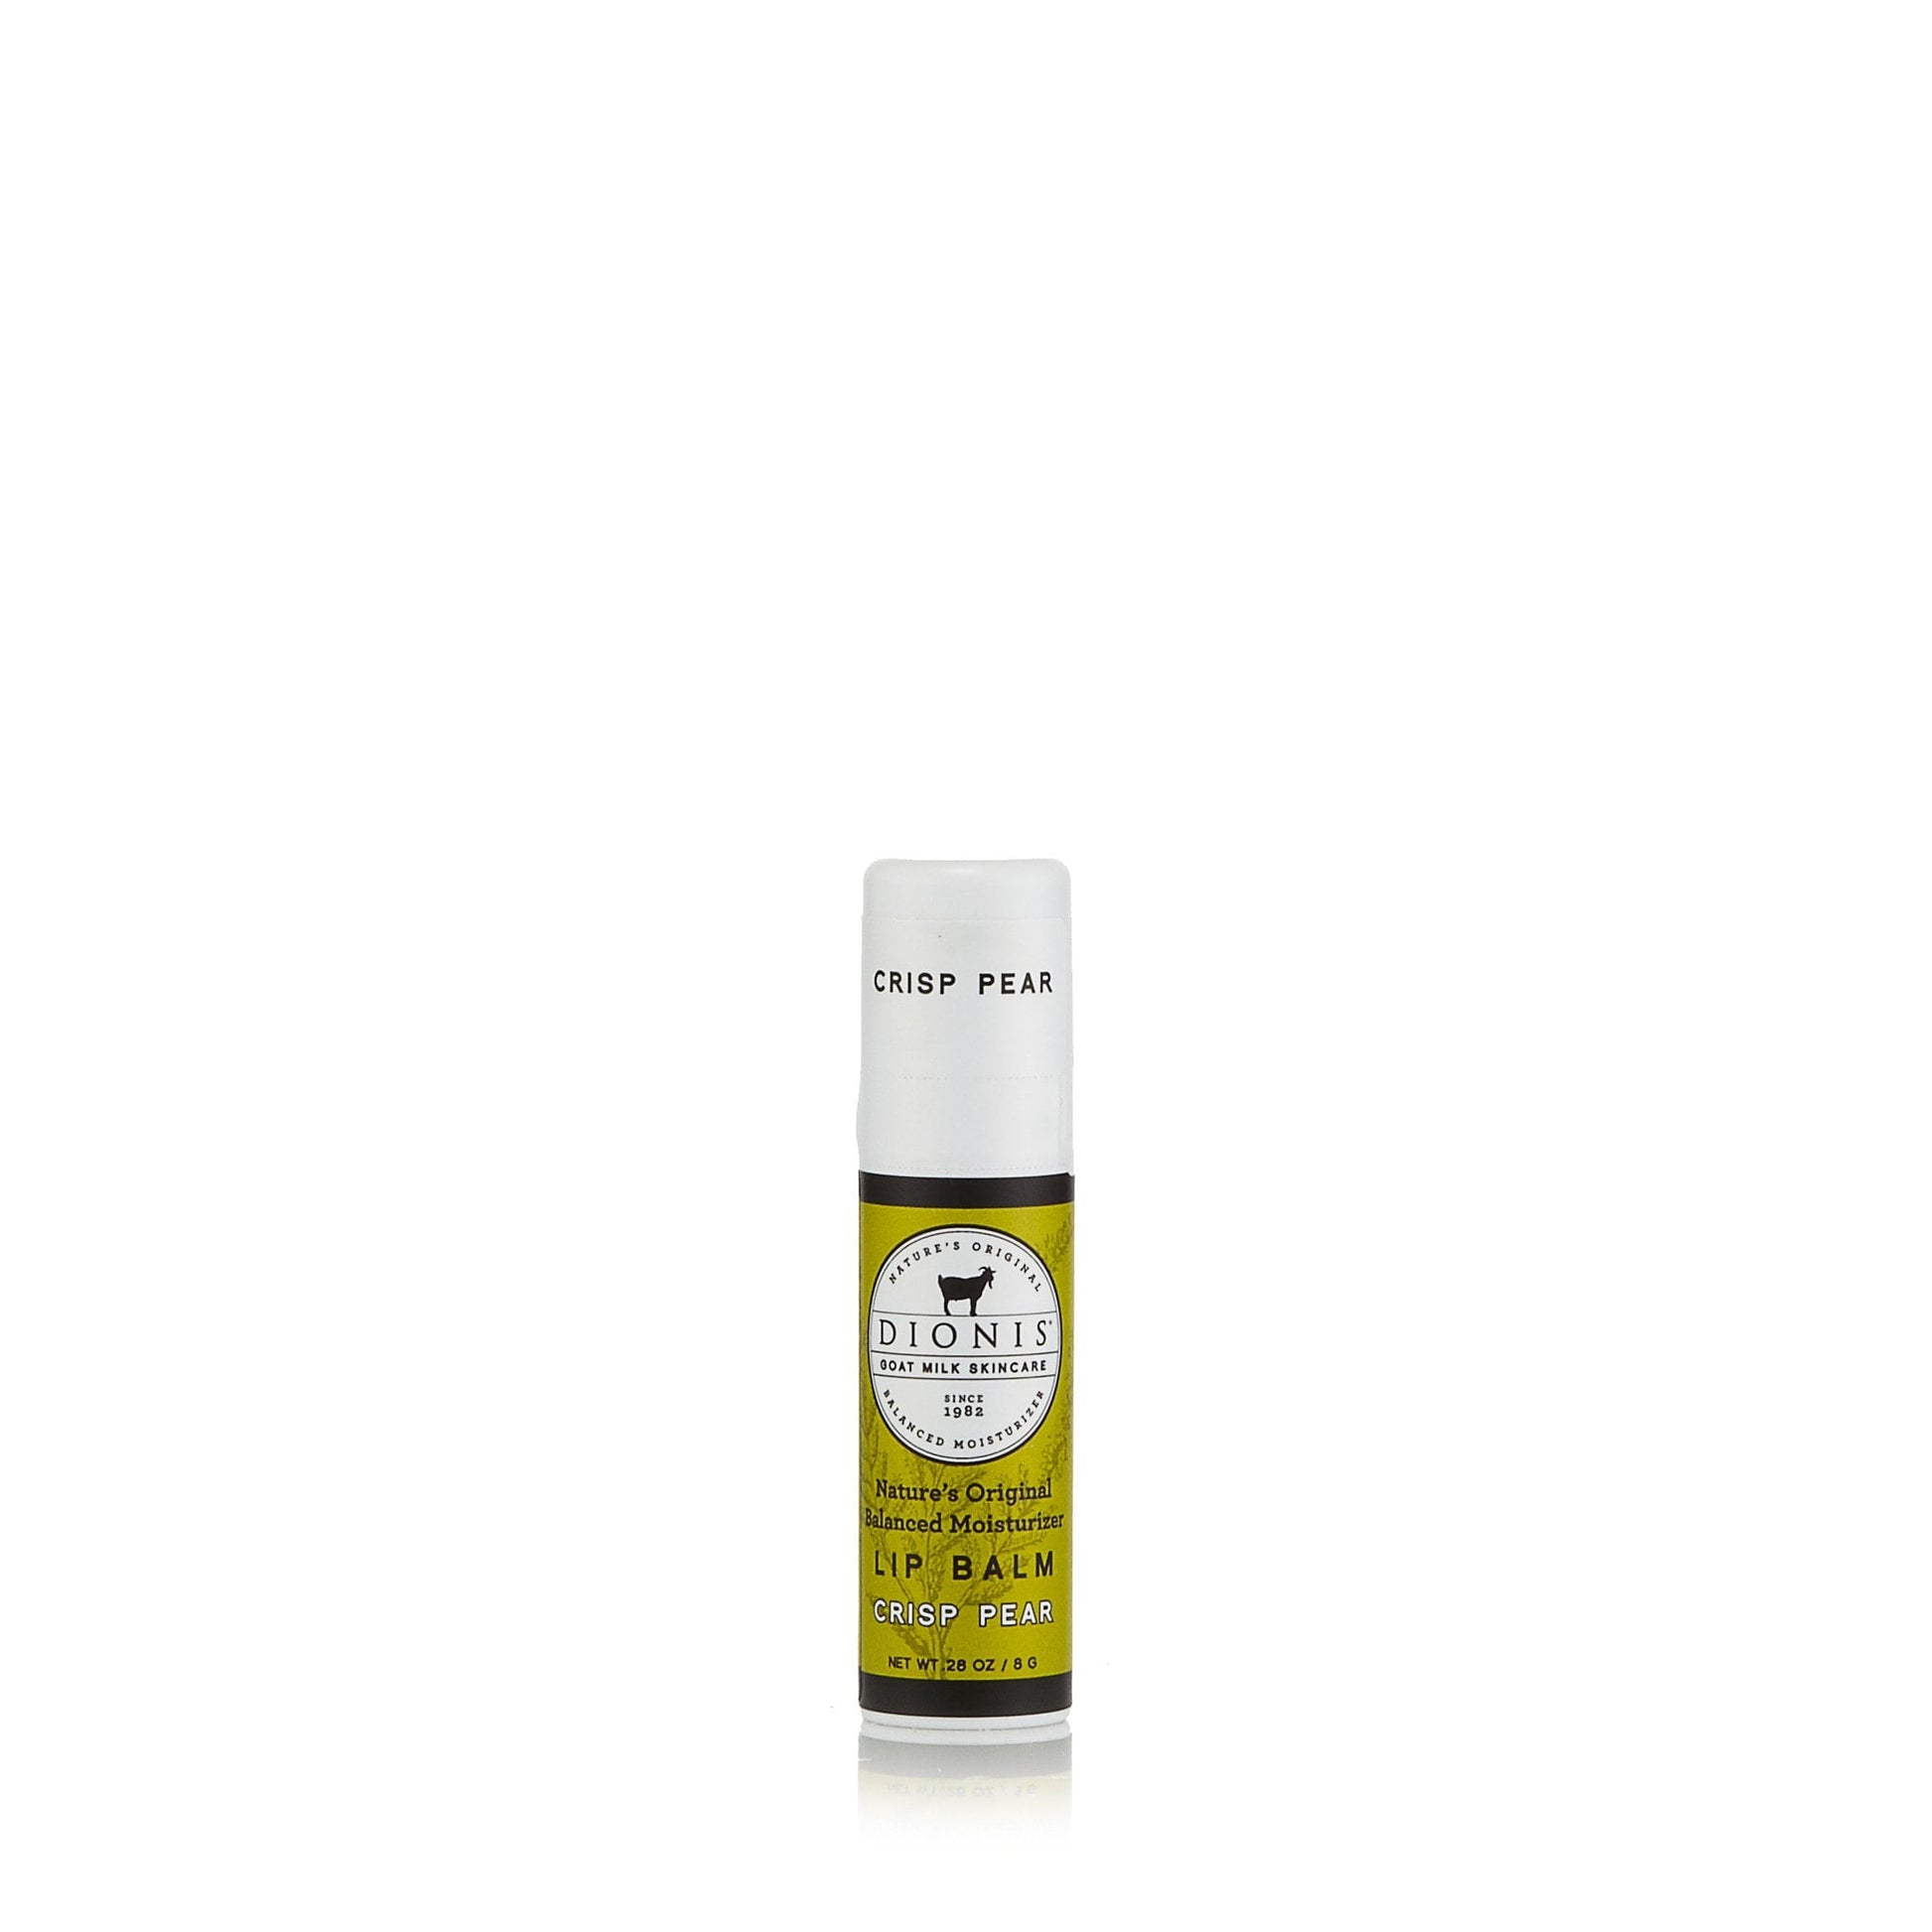 Lip Balm by Dionis, Product image 3